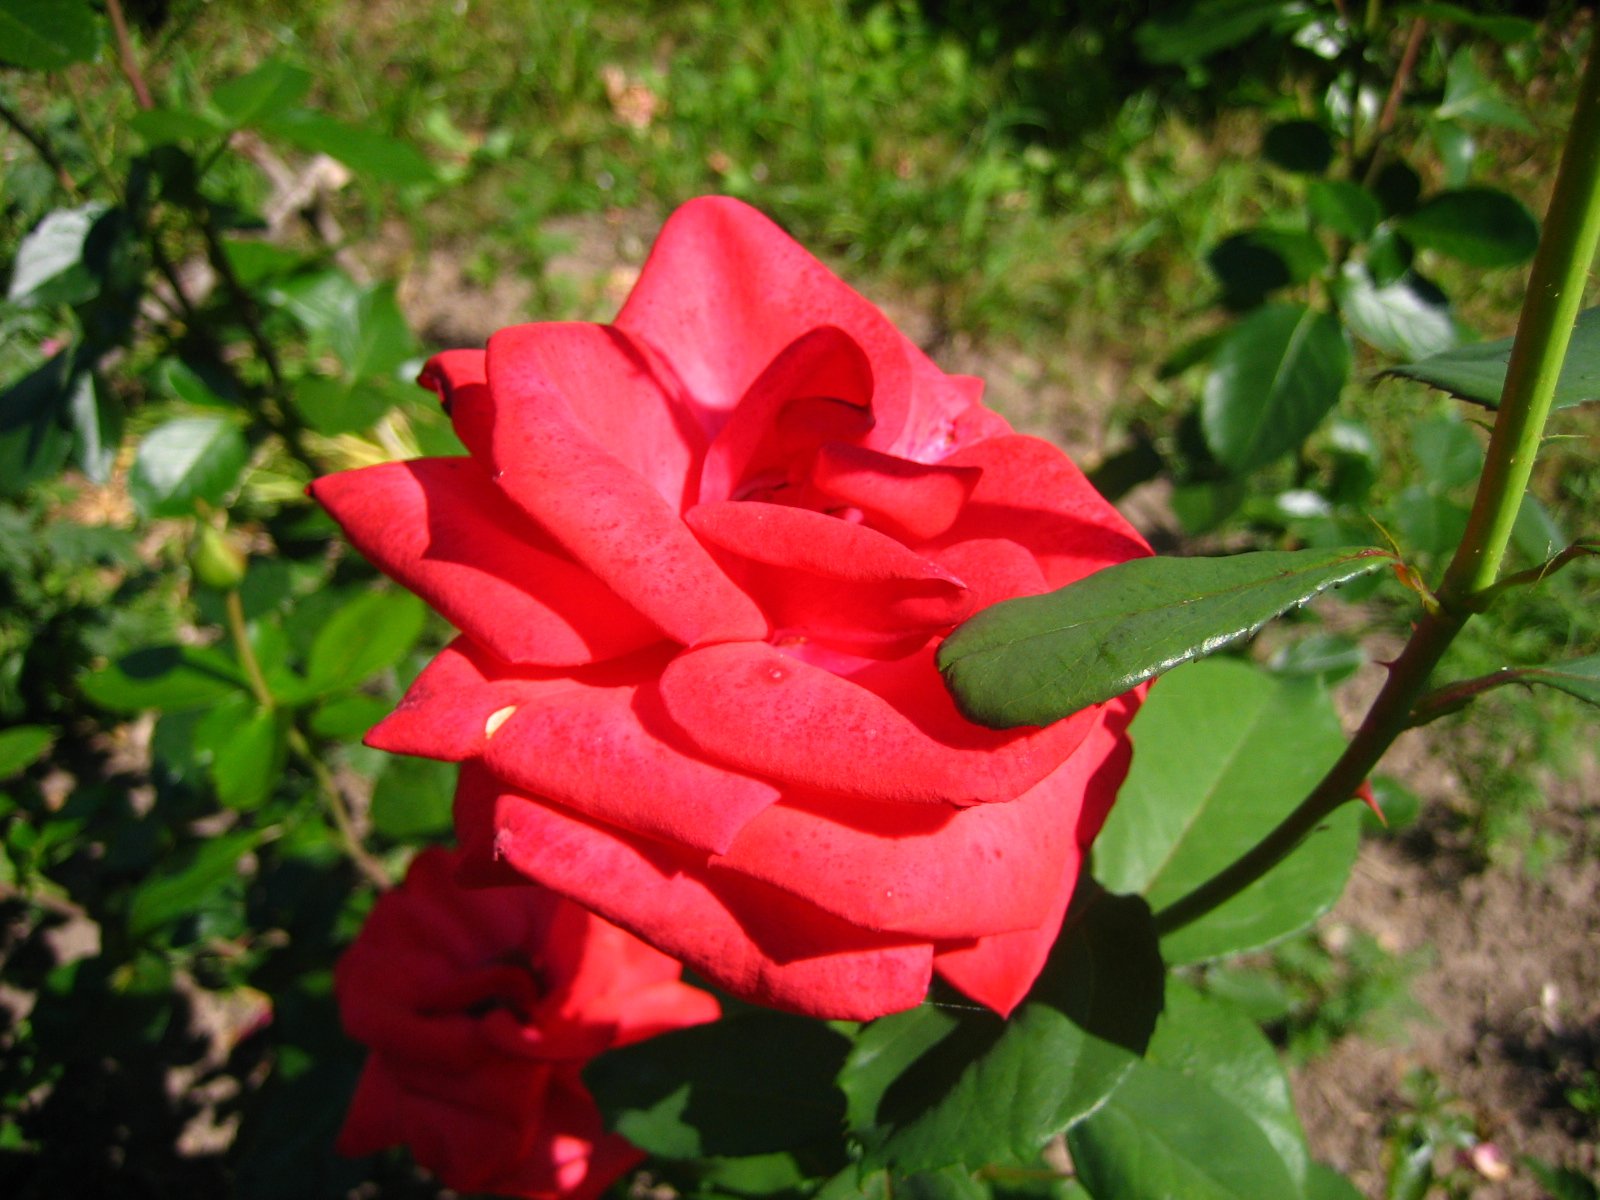 a close up of a red rose in the grass